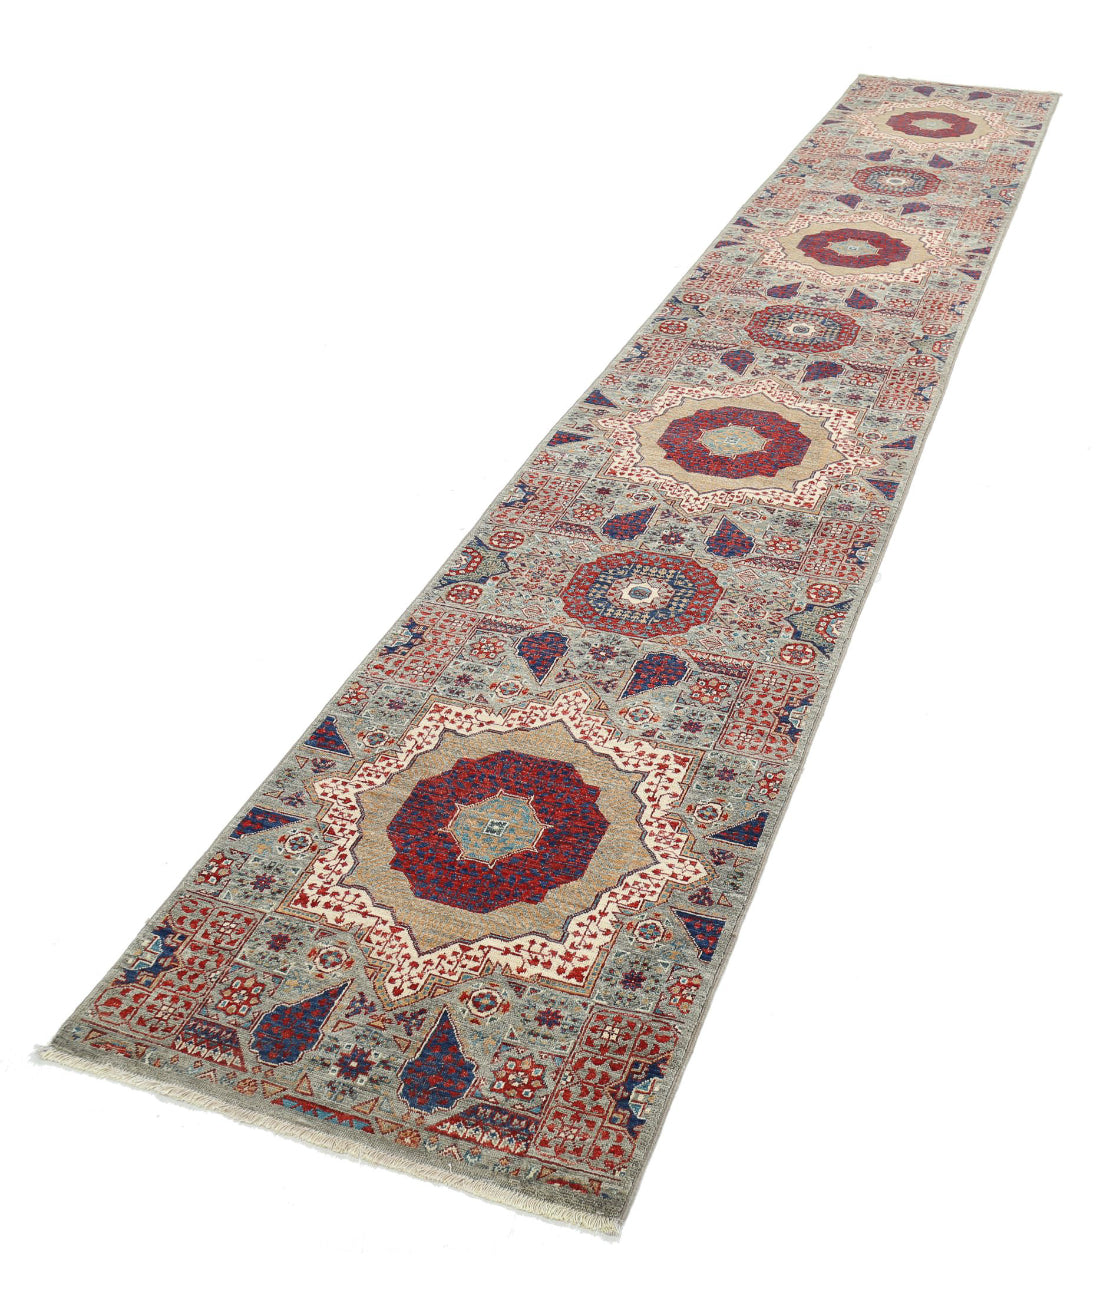 Mamluk 2'6'' X 14'7'' Hand-Knotted Wool Rug 2'6'' x 14'7'' (75 X 438) / Grey / Red